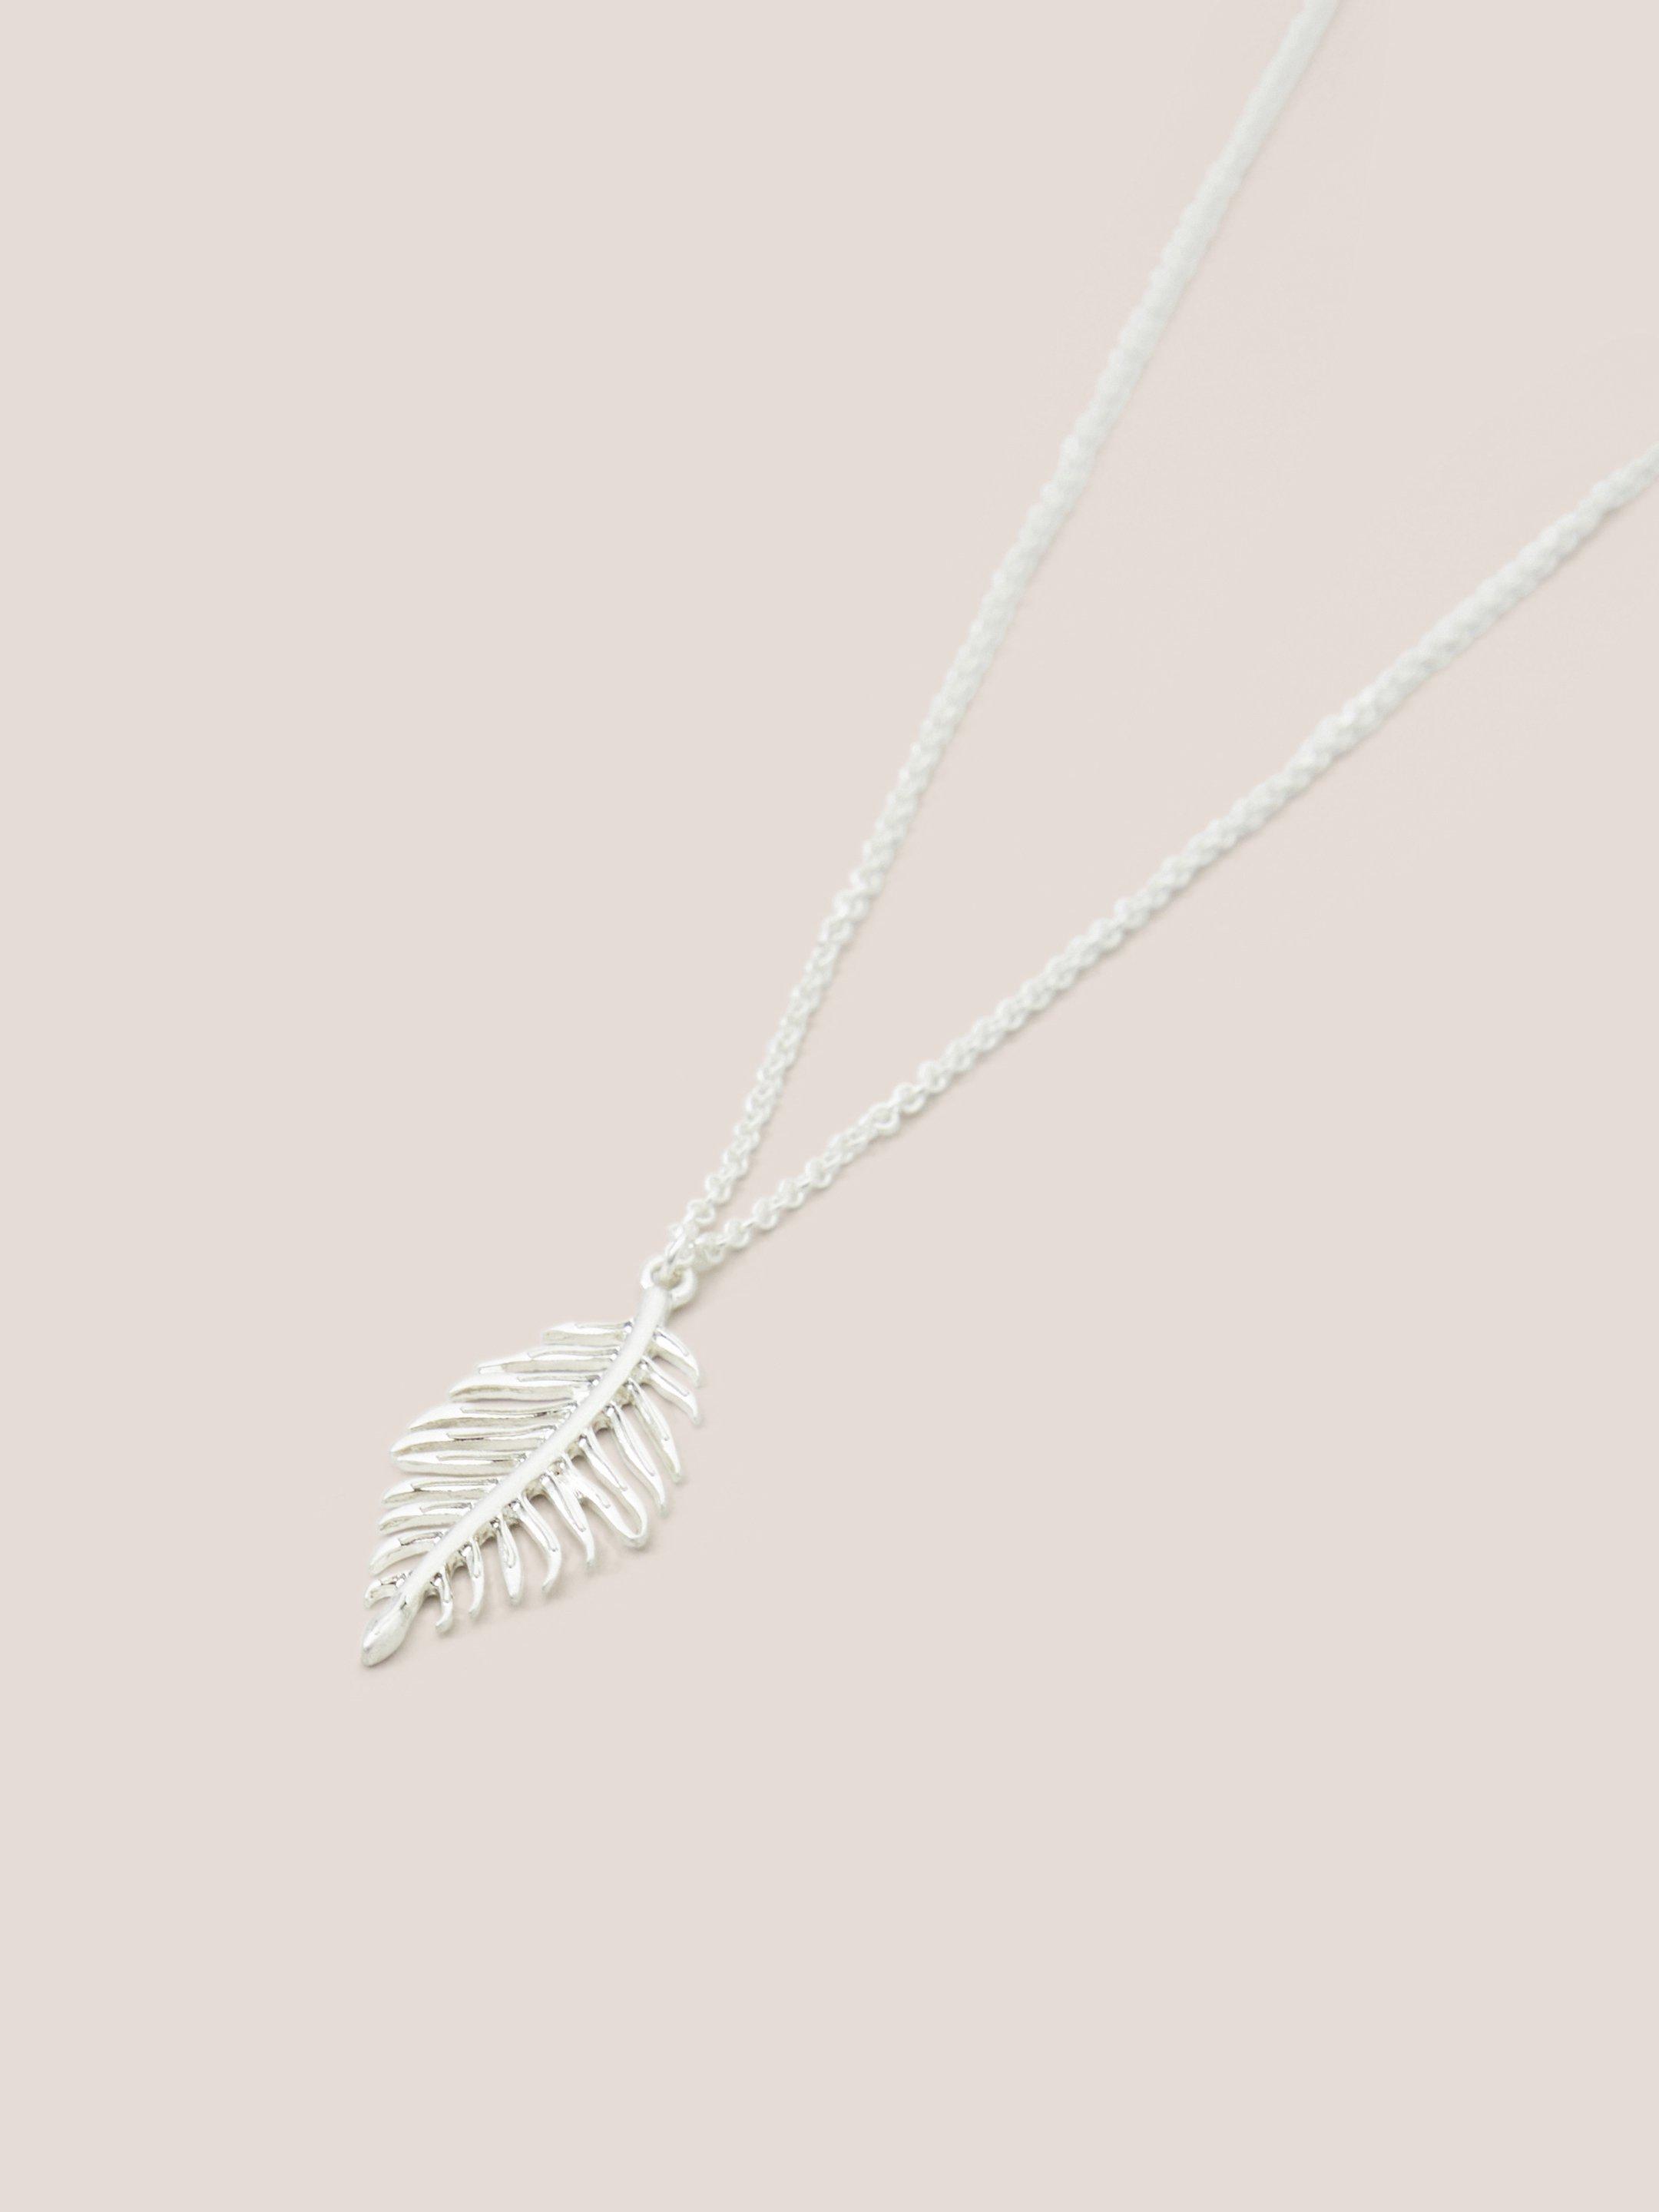 Feather Pendant Necklace in SLV TN MET - FLAT DETAIL